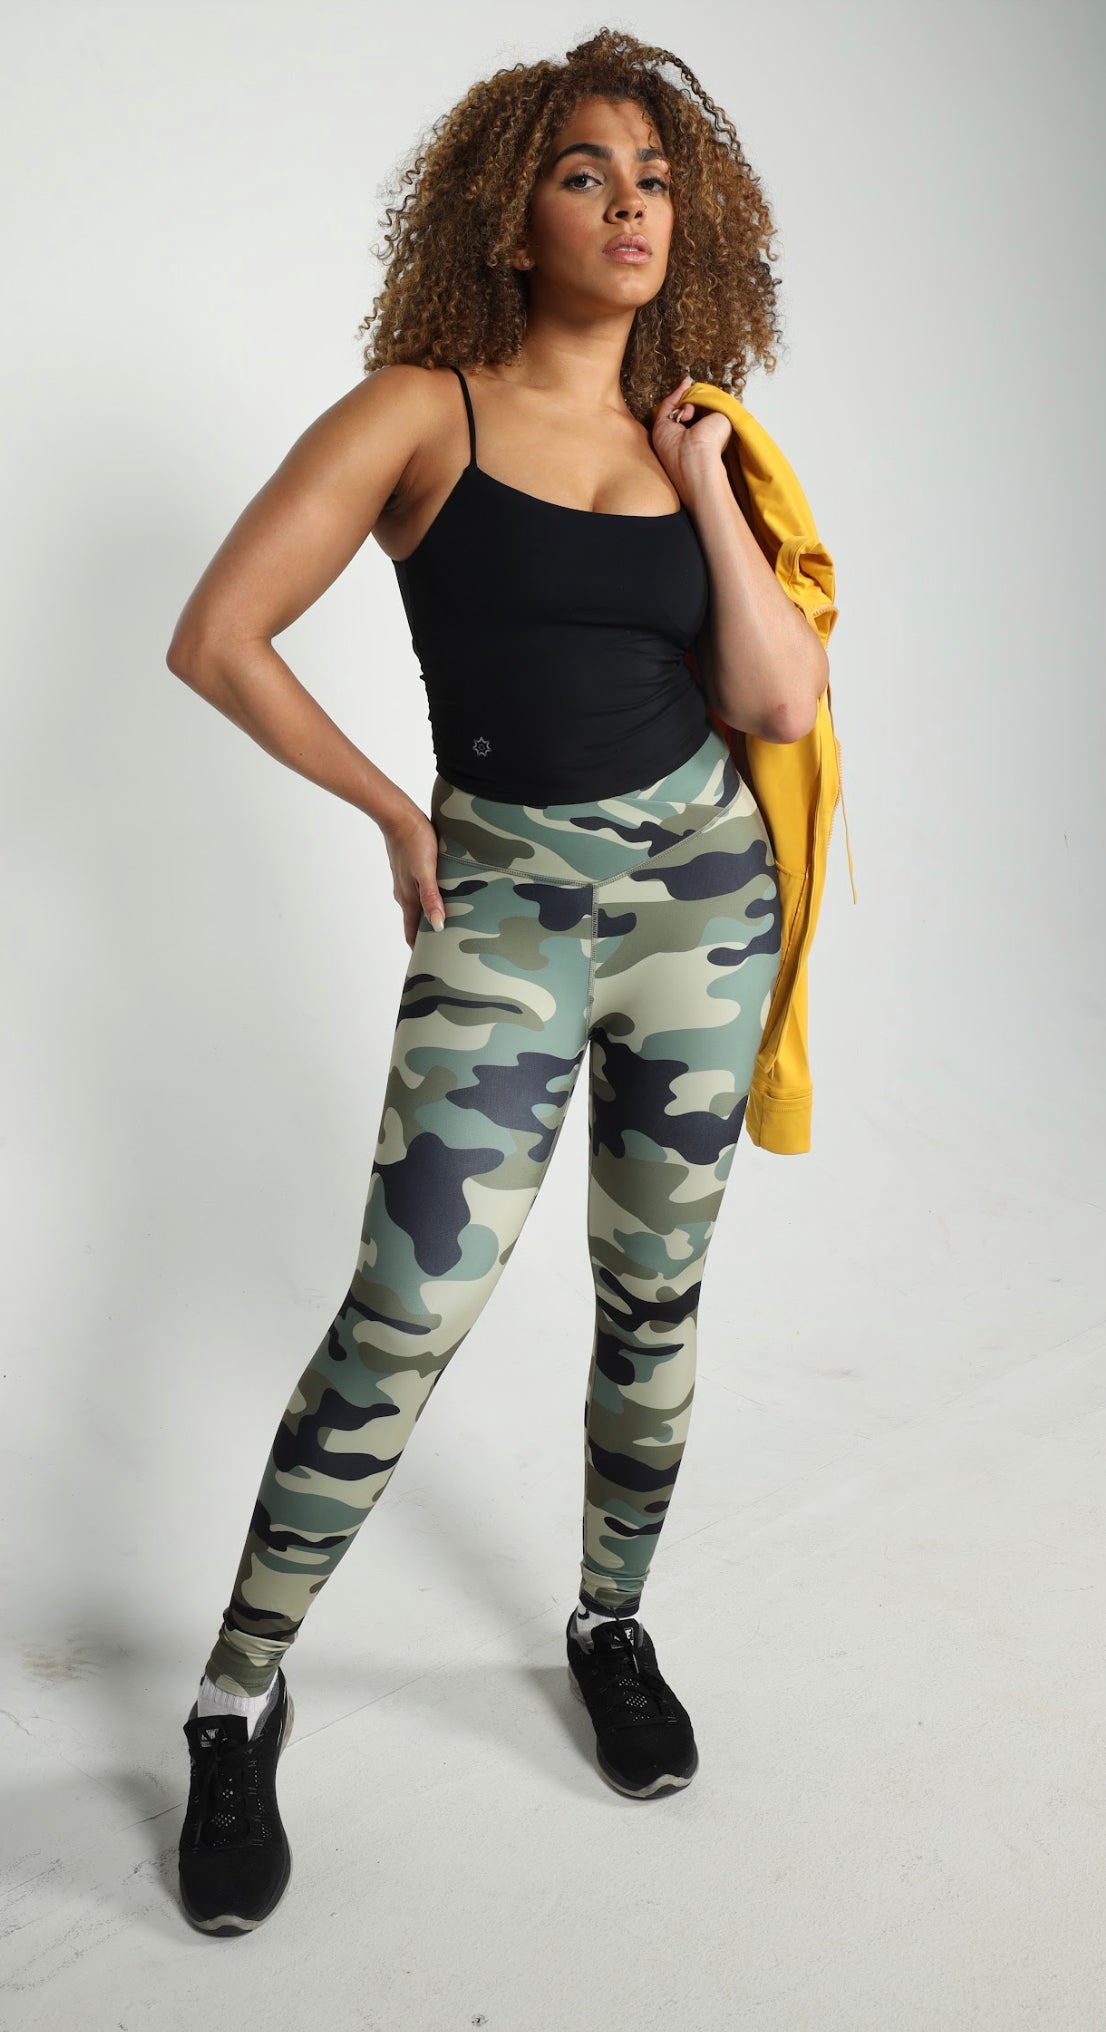 High Waist Seamless Camouflage Seamless Gym Leggings In For Women Scrunch  Butt Booty, Ideal For Sports, Fitness, And Yoga Style 210929 From Kong003,  $9.67 | DHgate.Com